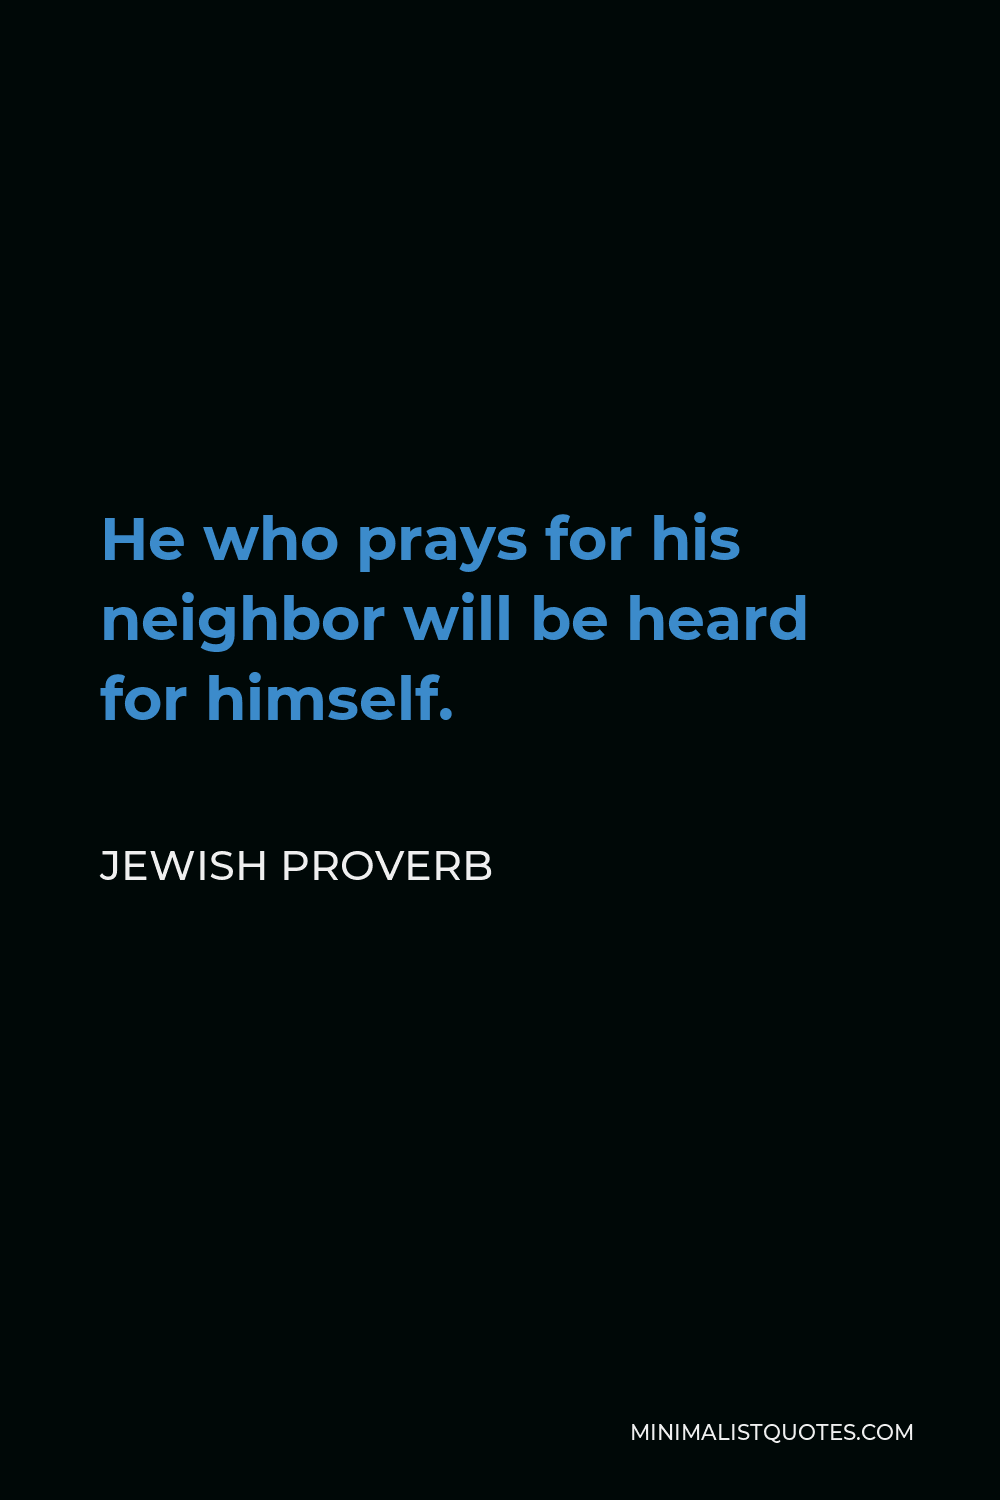 Jewish Proverb Quote - He who prays for his neighbor will be heard for himself.